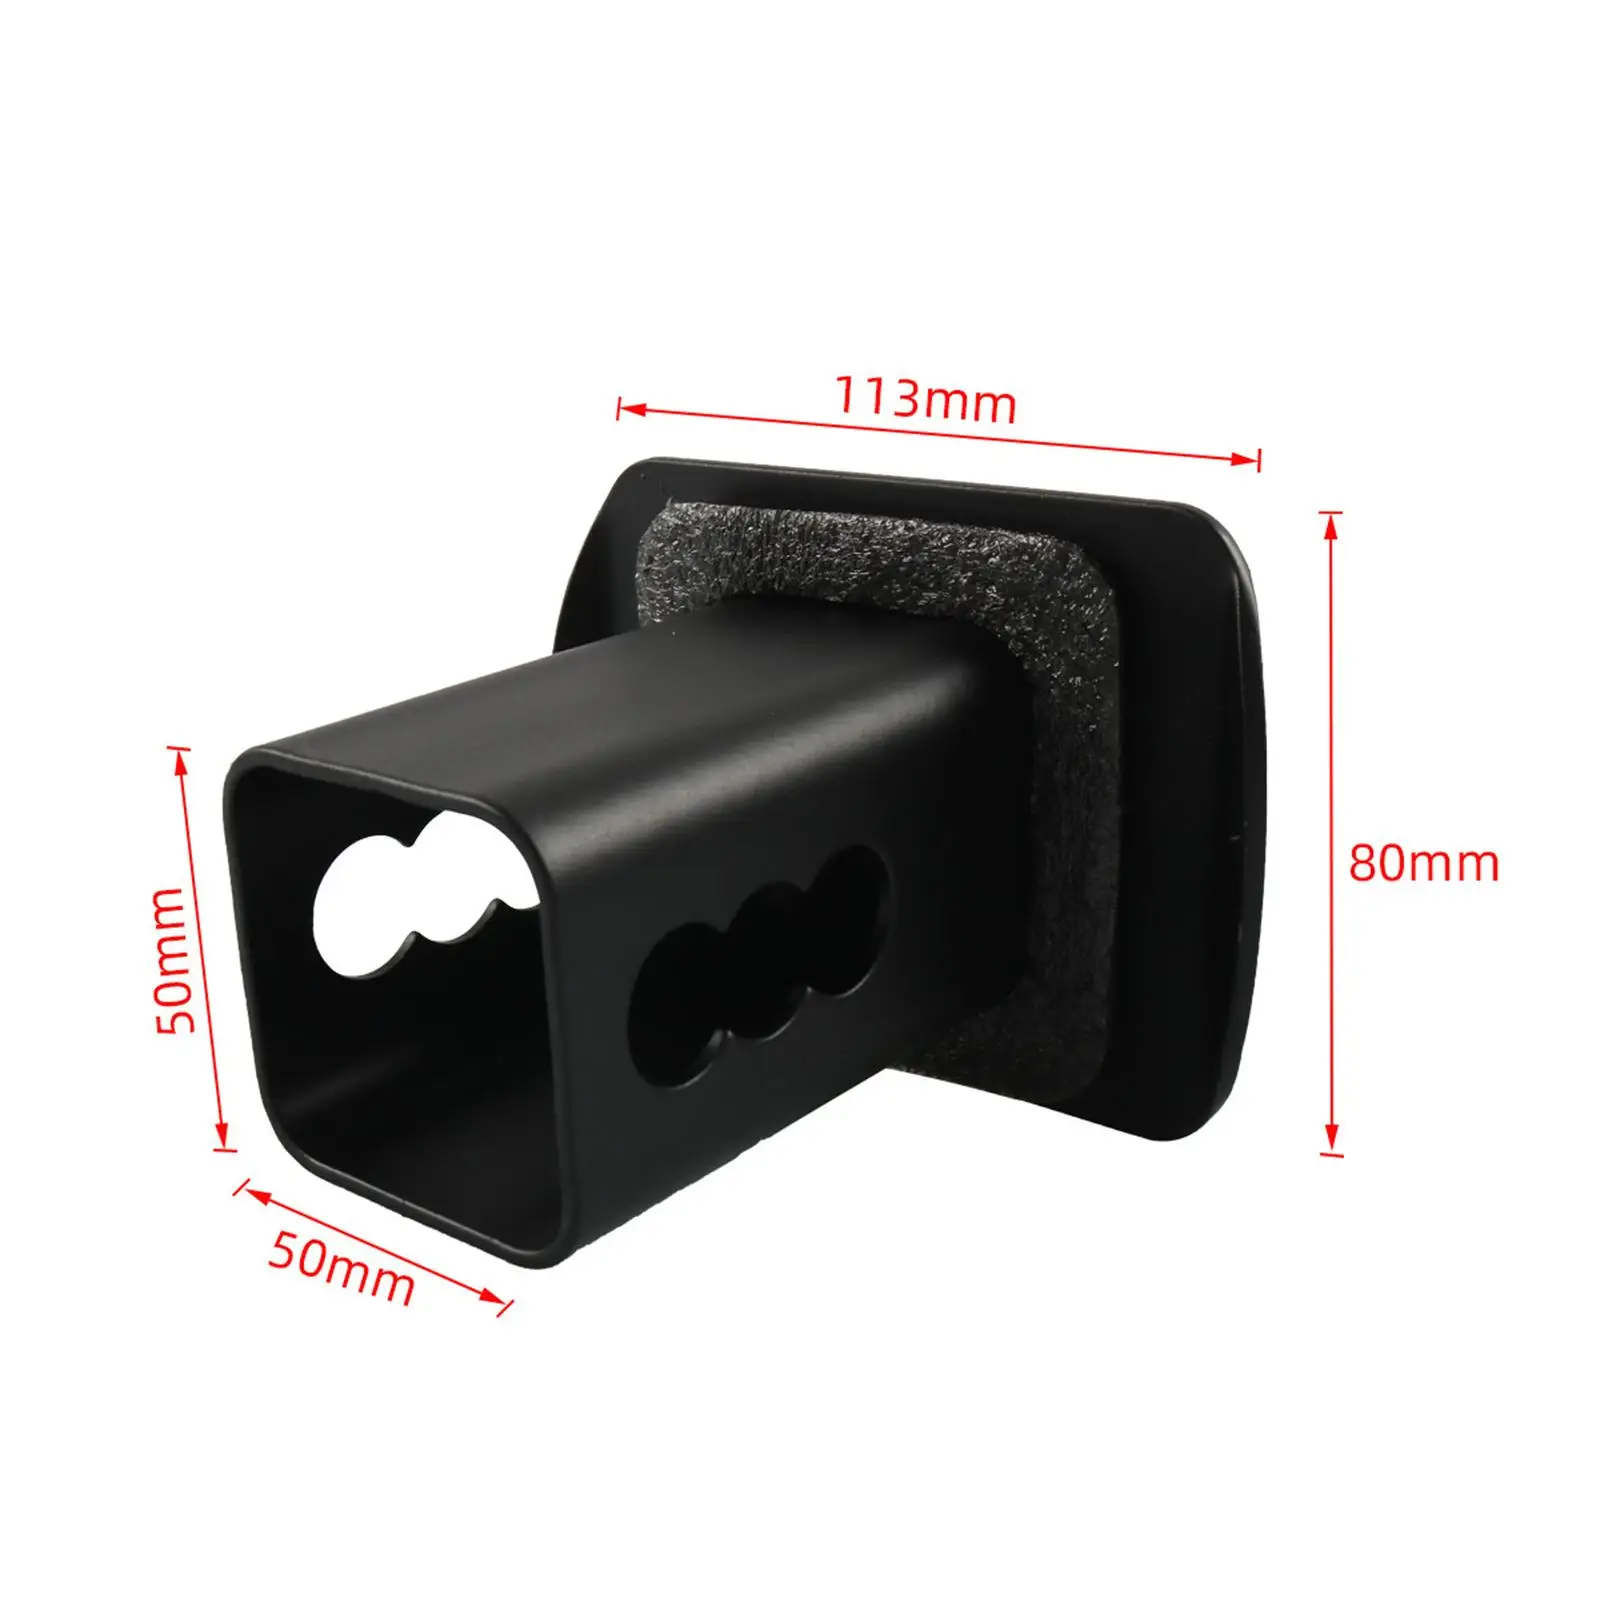 Tow Trailer Hitch cover for 2inch Receivers for Car SUV Vehicle Accessories